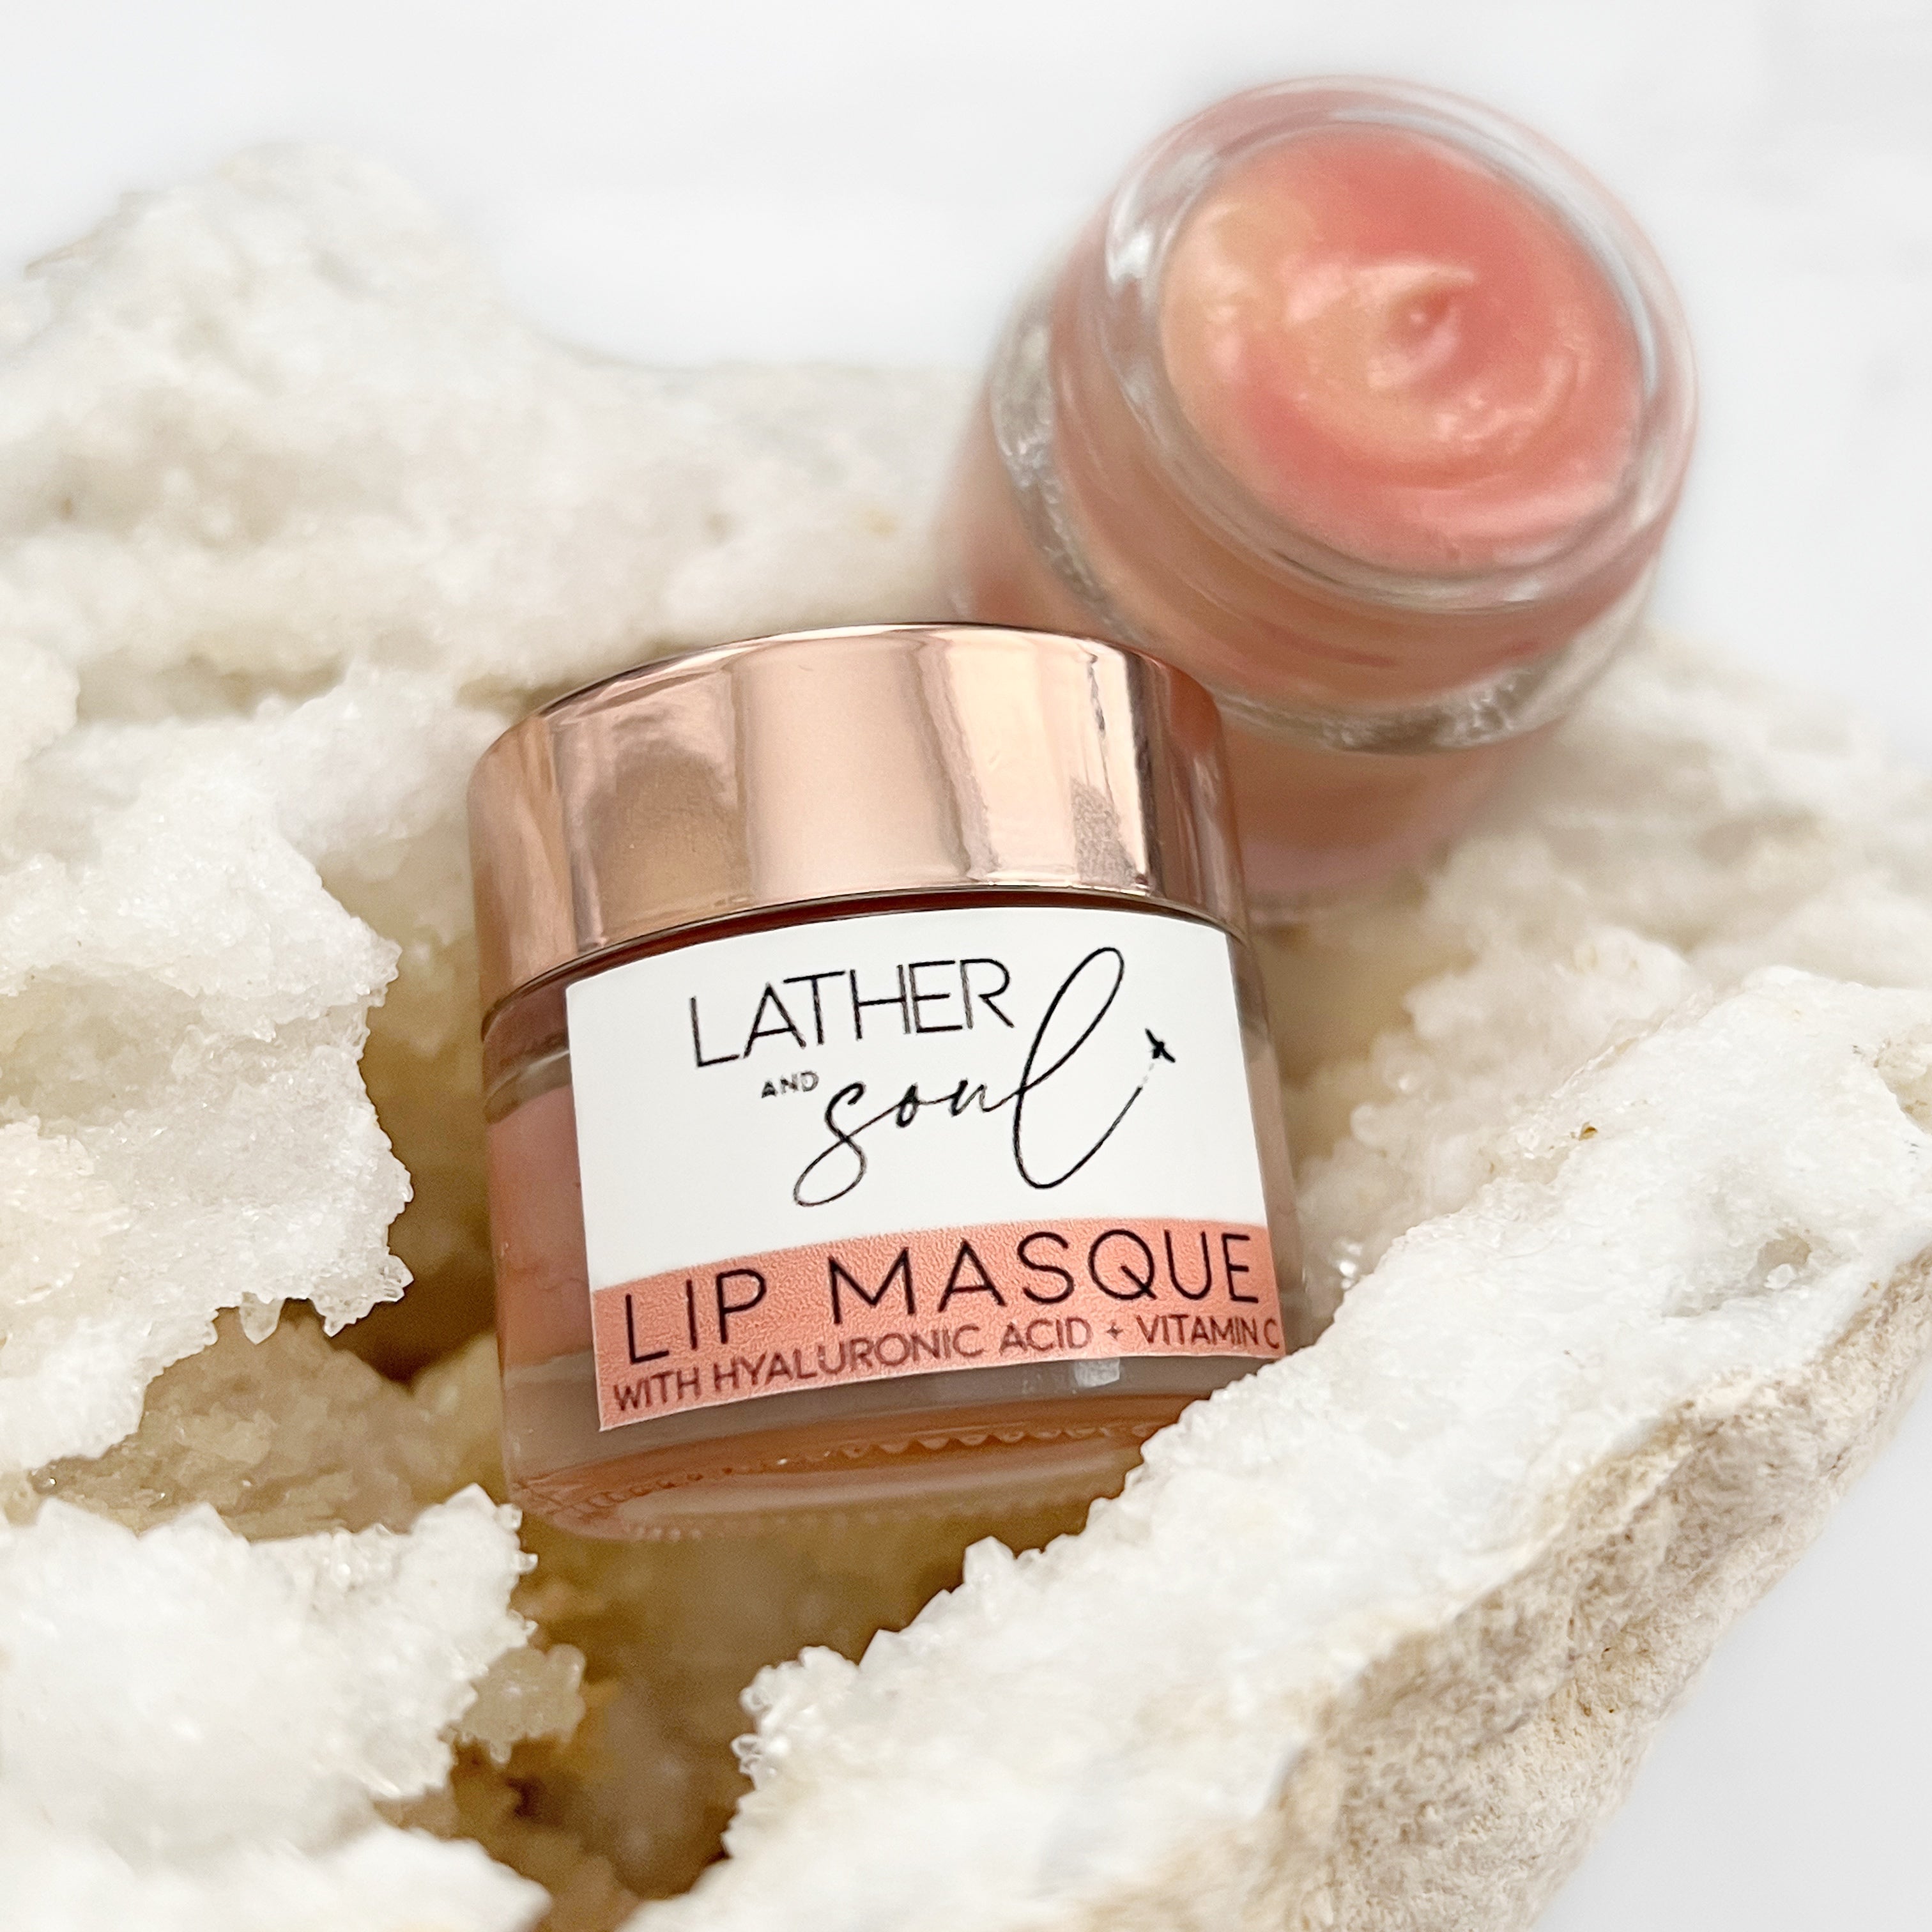 A Duo of Delight: Our Hydrating Lip Masque jars are beautifully showcased—one sealed with an elegant rose gold cap, the other open to reveal its creamy, nourishing texture. This image captures the sophistication and luxurious nature of our lip treatment, inviting customers to experience its hydrating benefits firsthand.